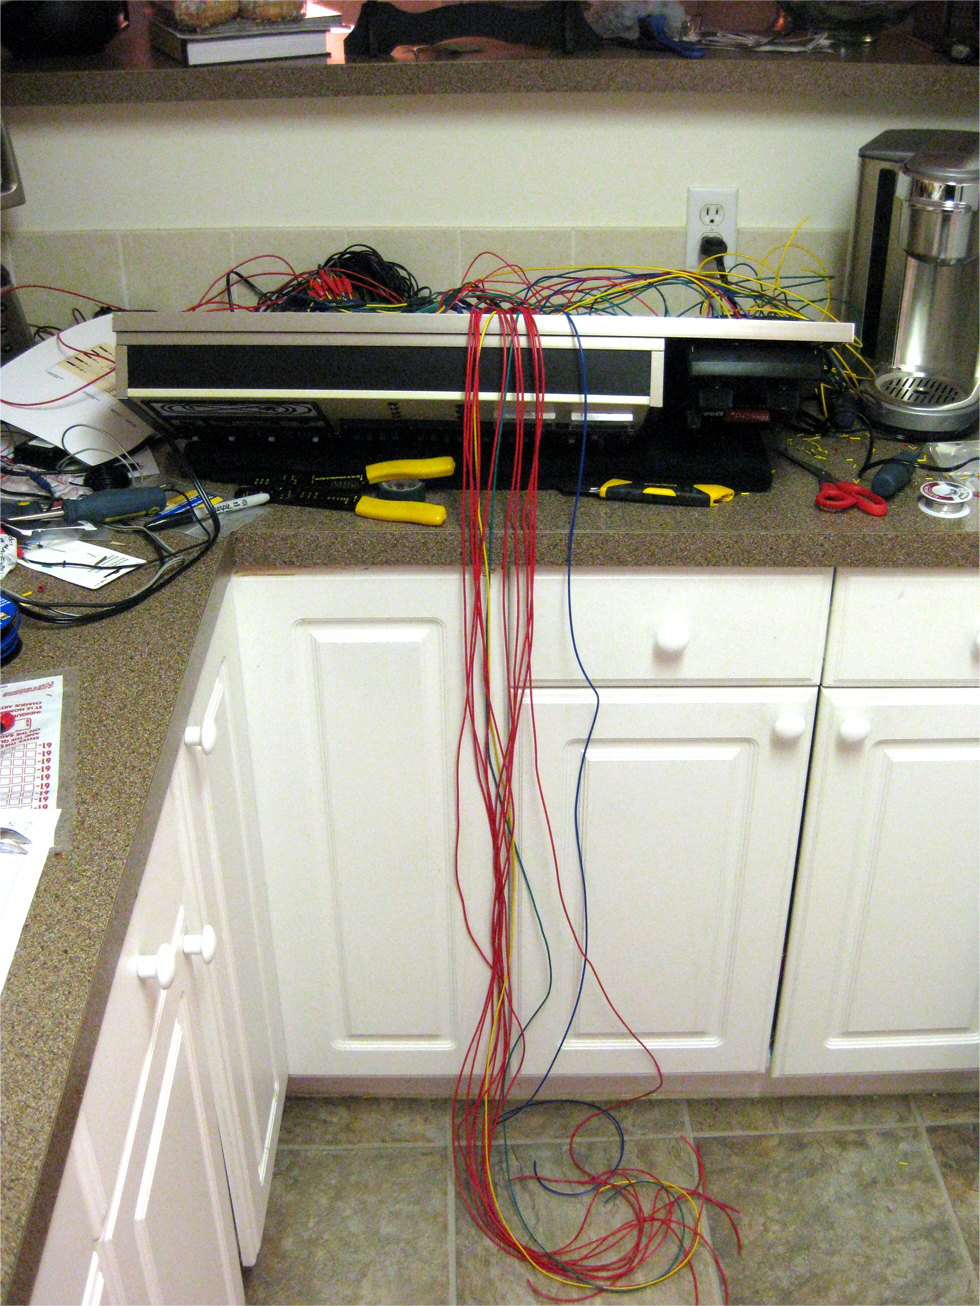 Wiring components together inside a model railroad control panel with long power leads hanging out